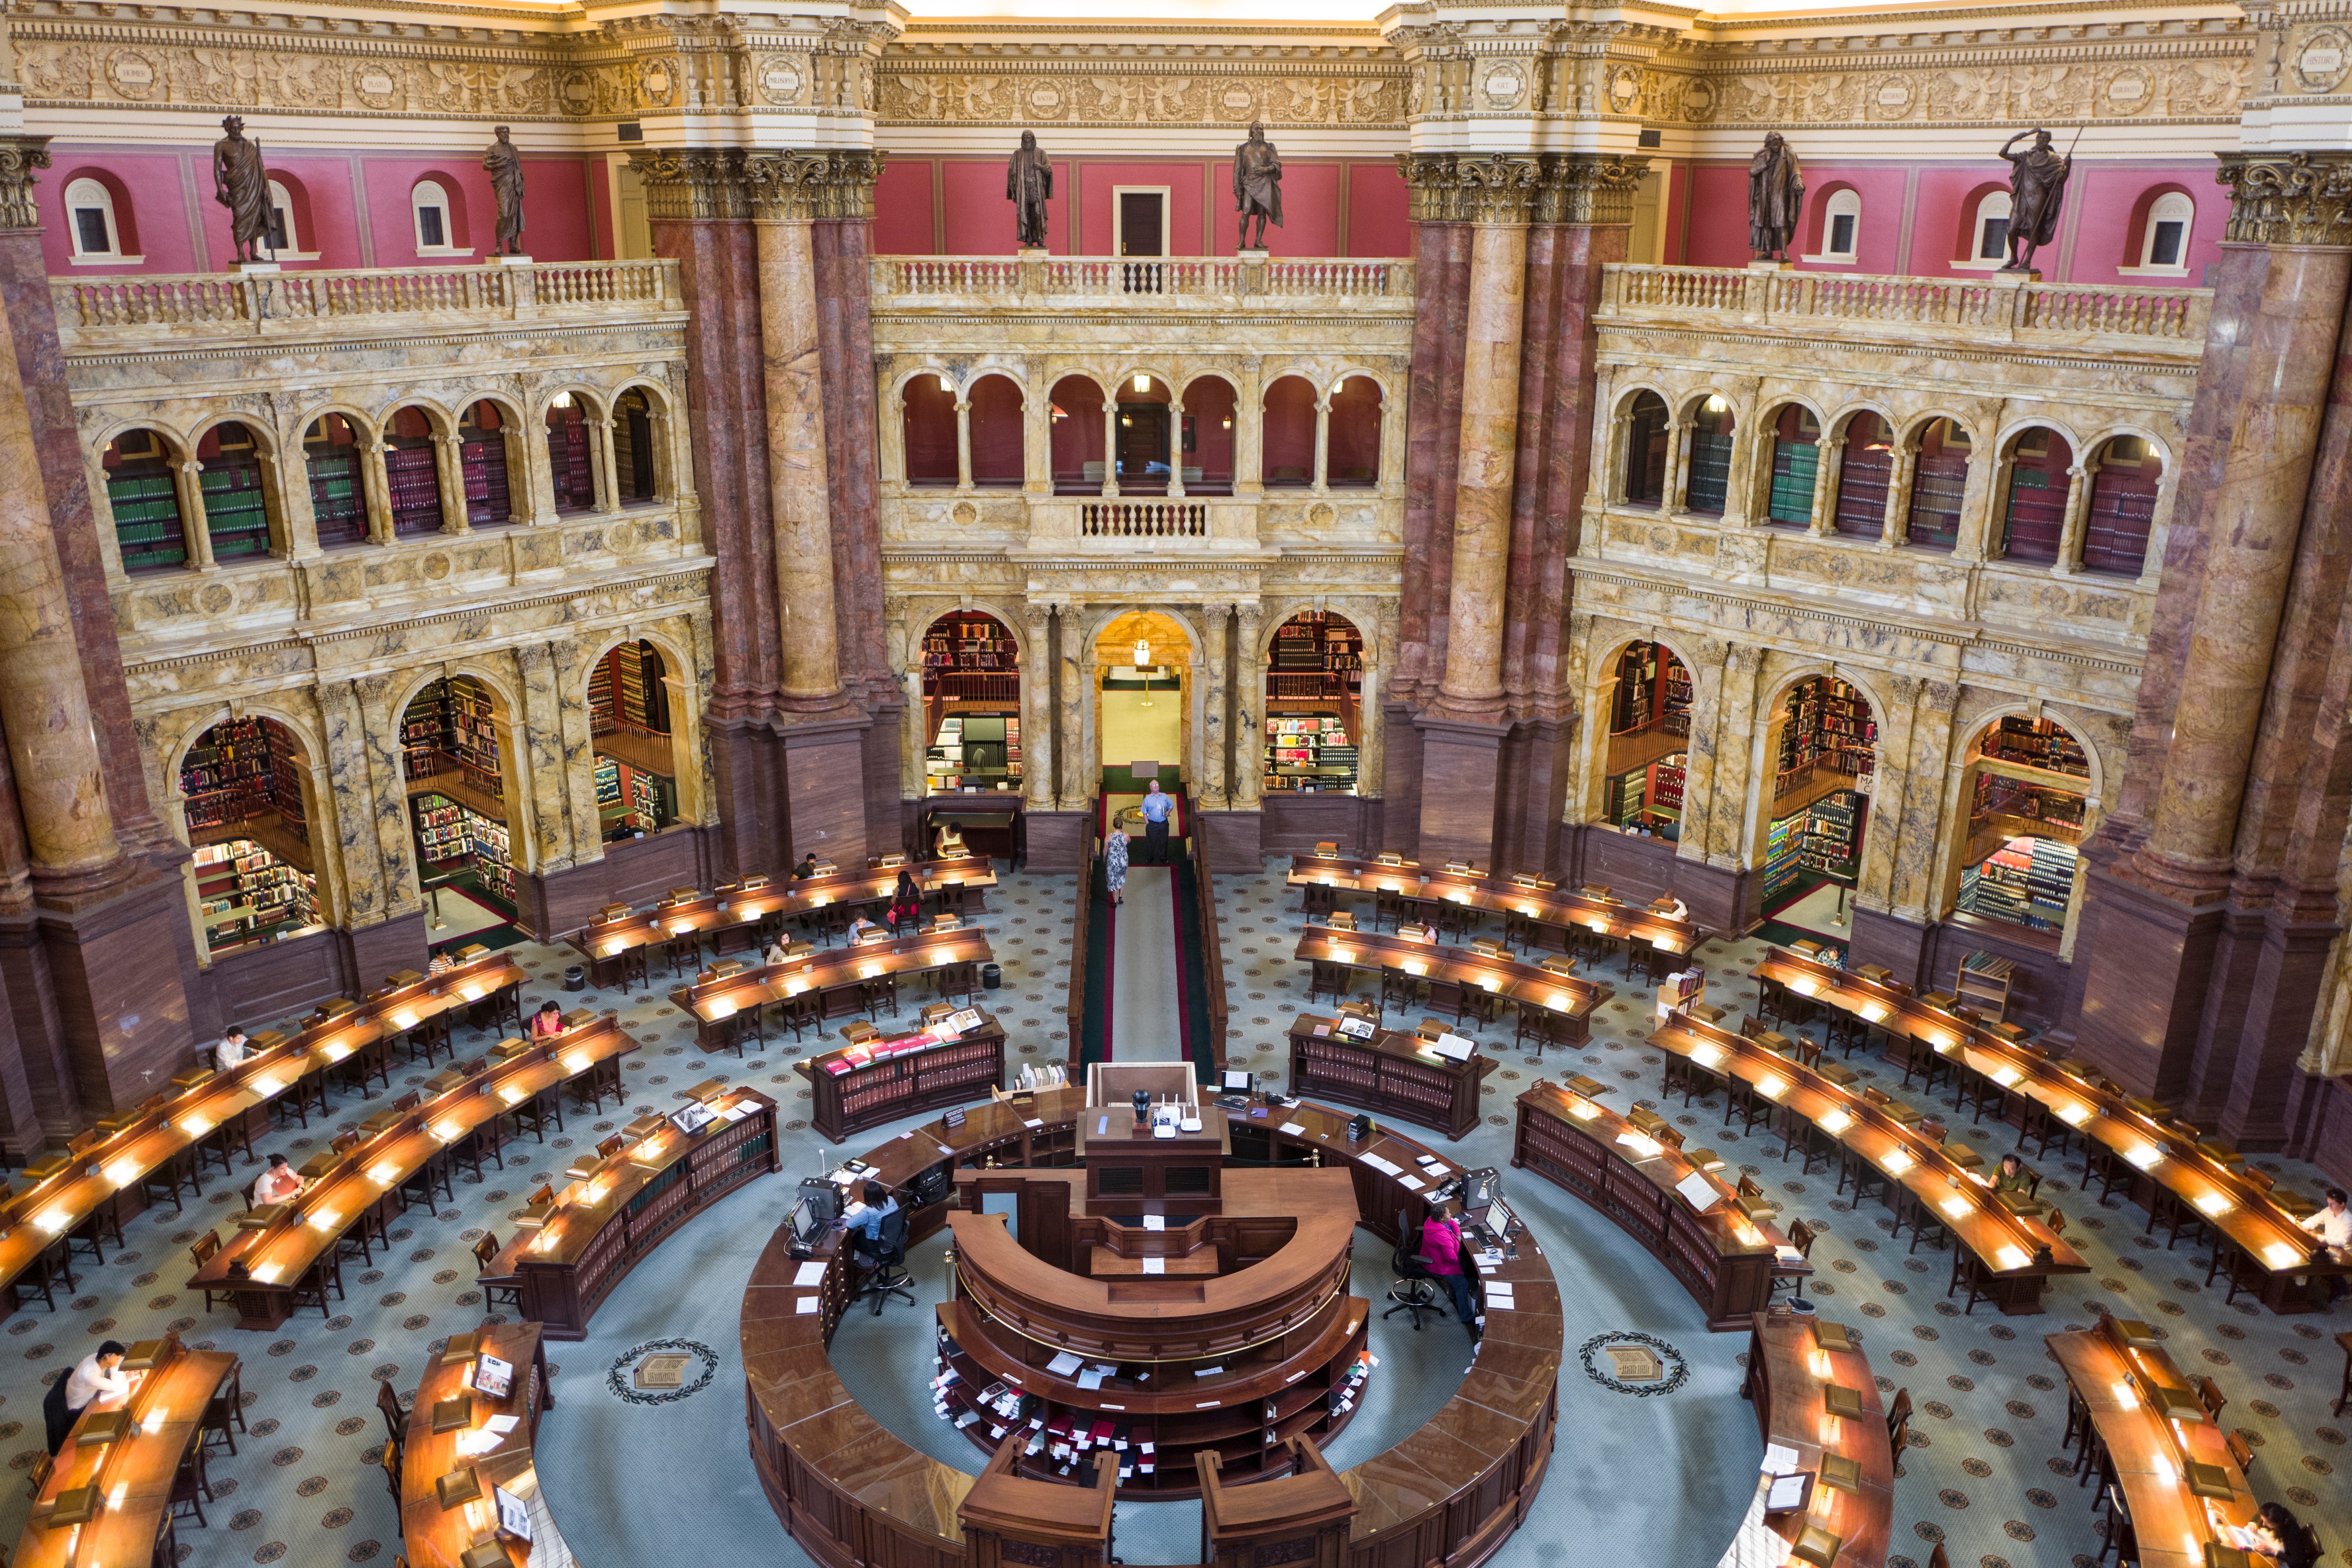 An interior view of the Main Reading Room from an overlook at the  Library of Congress Thomas Jefferson Building is shown on Wednesday, August 12, 2015. (Nikki Kahn&mdash;The Washington Post/Getty Images)